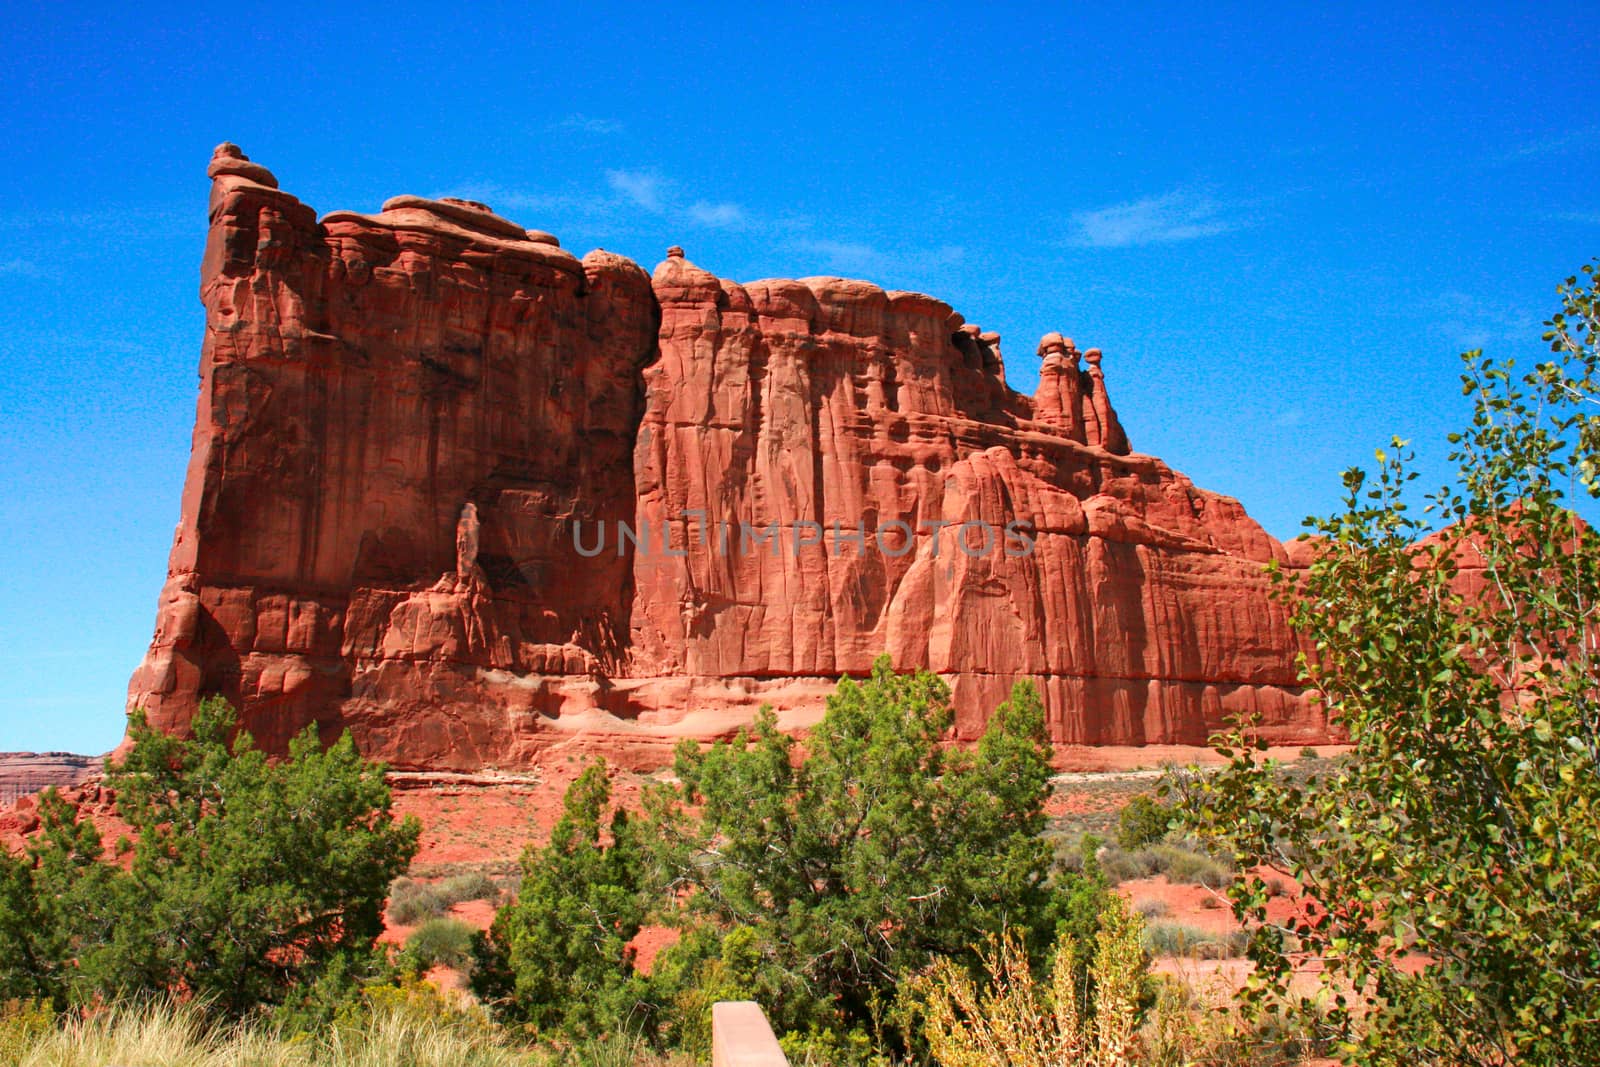 Arches National Park, Utah USA - Tower of Babel, Courthouse Towe by Catmando